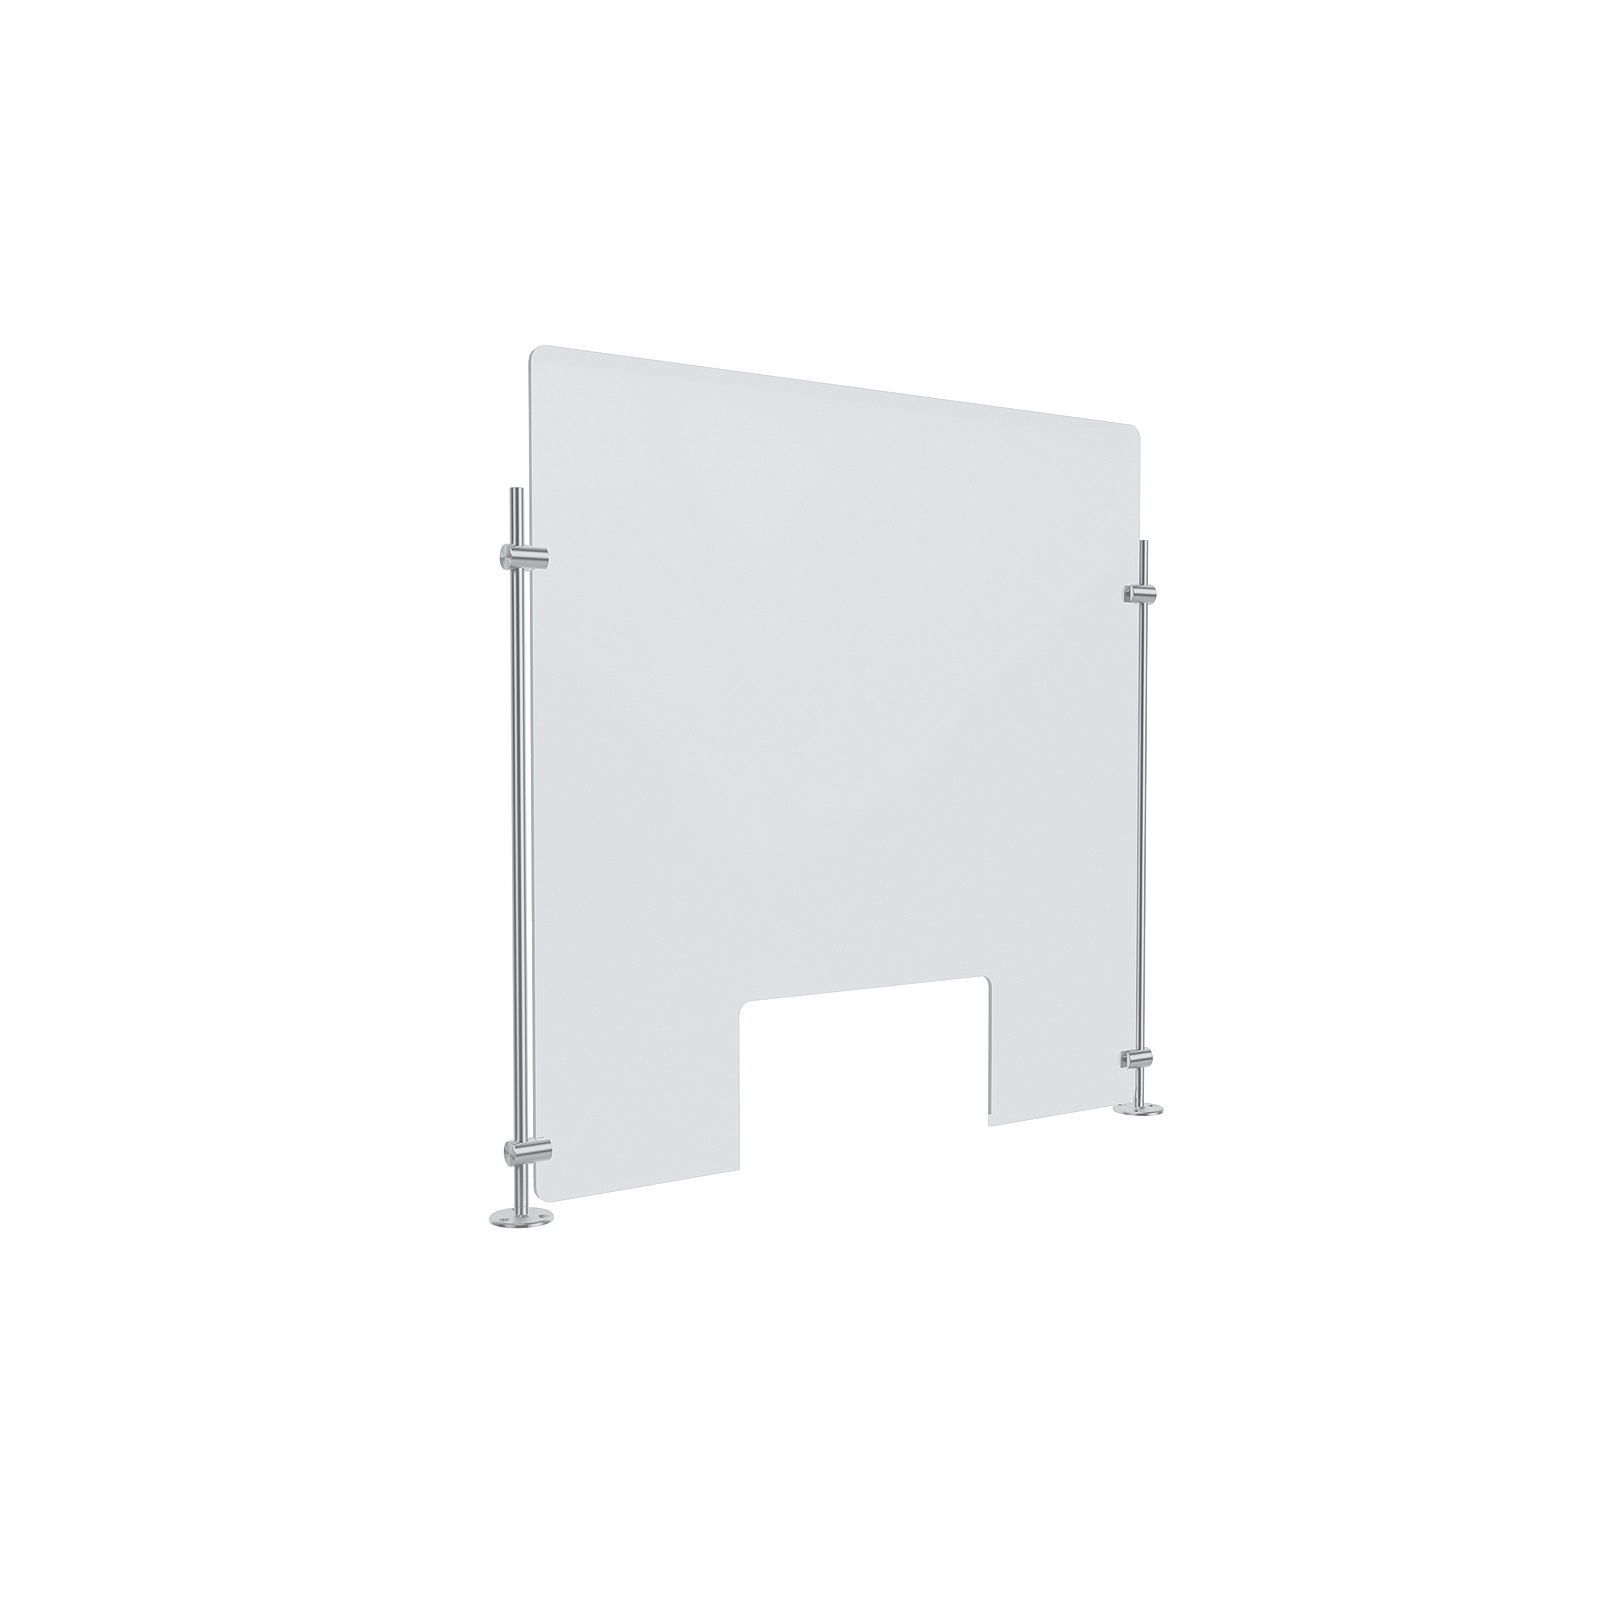 Clear Acrylic Sneeze Guard 23-1/2'' Wide x 23-1/2'' Tall (10'' x 5'' Cut Out), with (2) 20'' Tall x 3/8'' Diameter Clear Anodized Aluminum Rod on the Side.